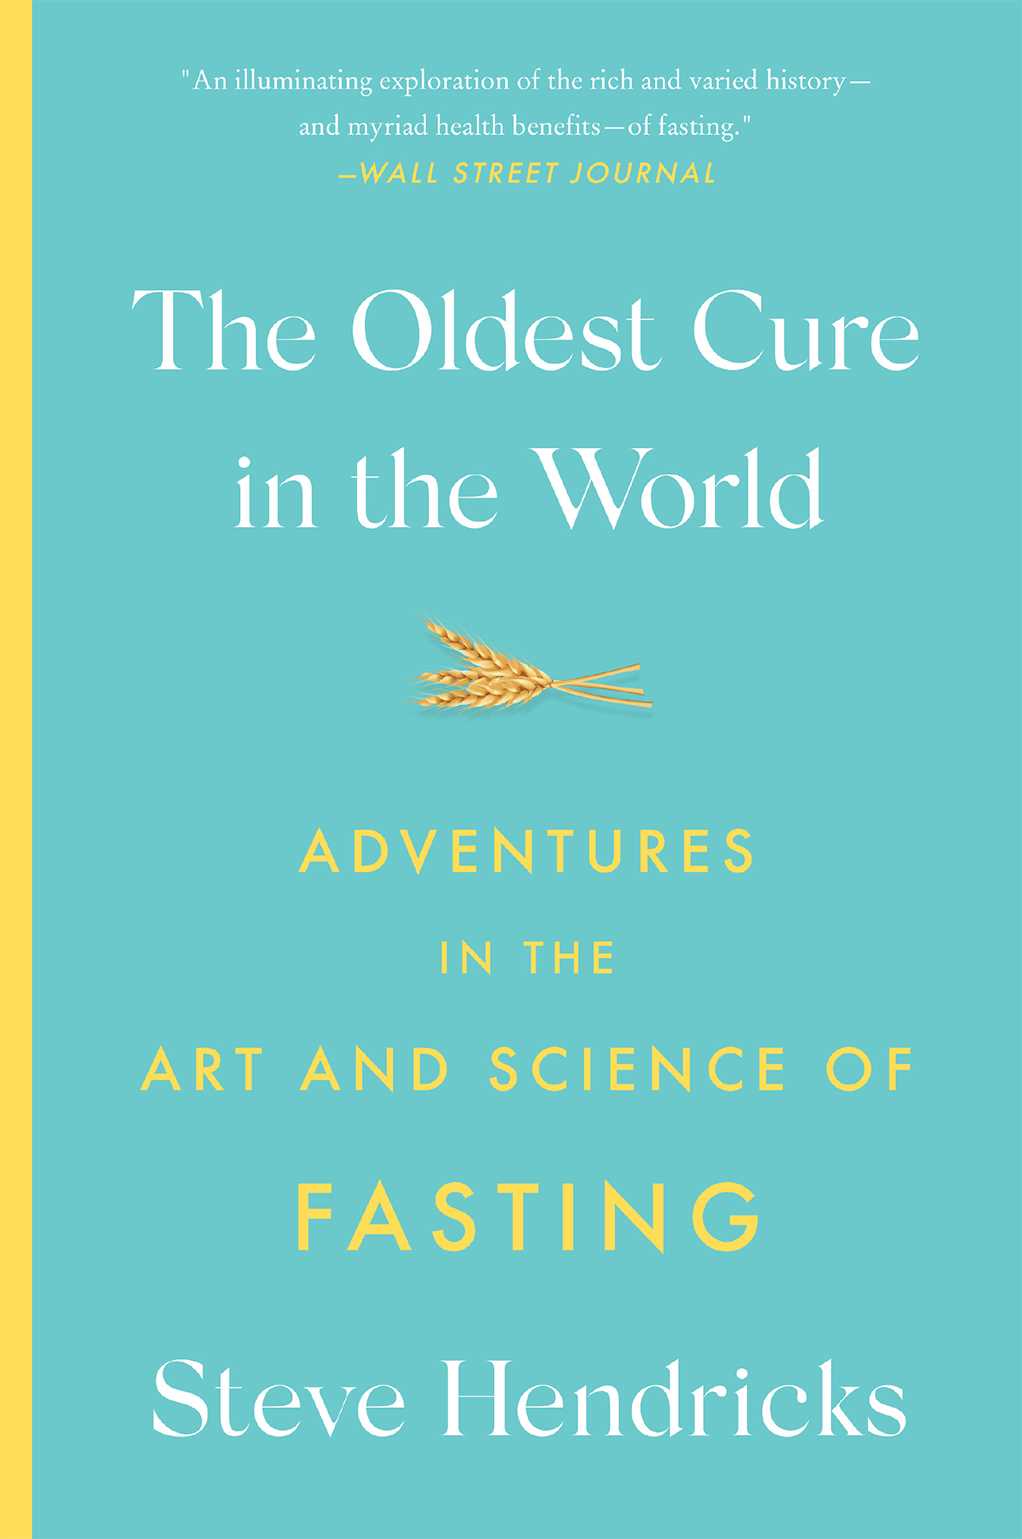 The Oldest Cure in the World